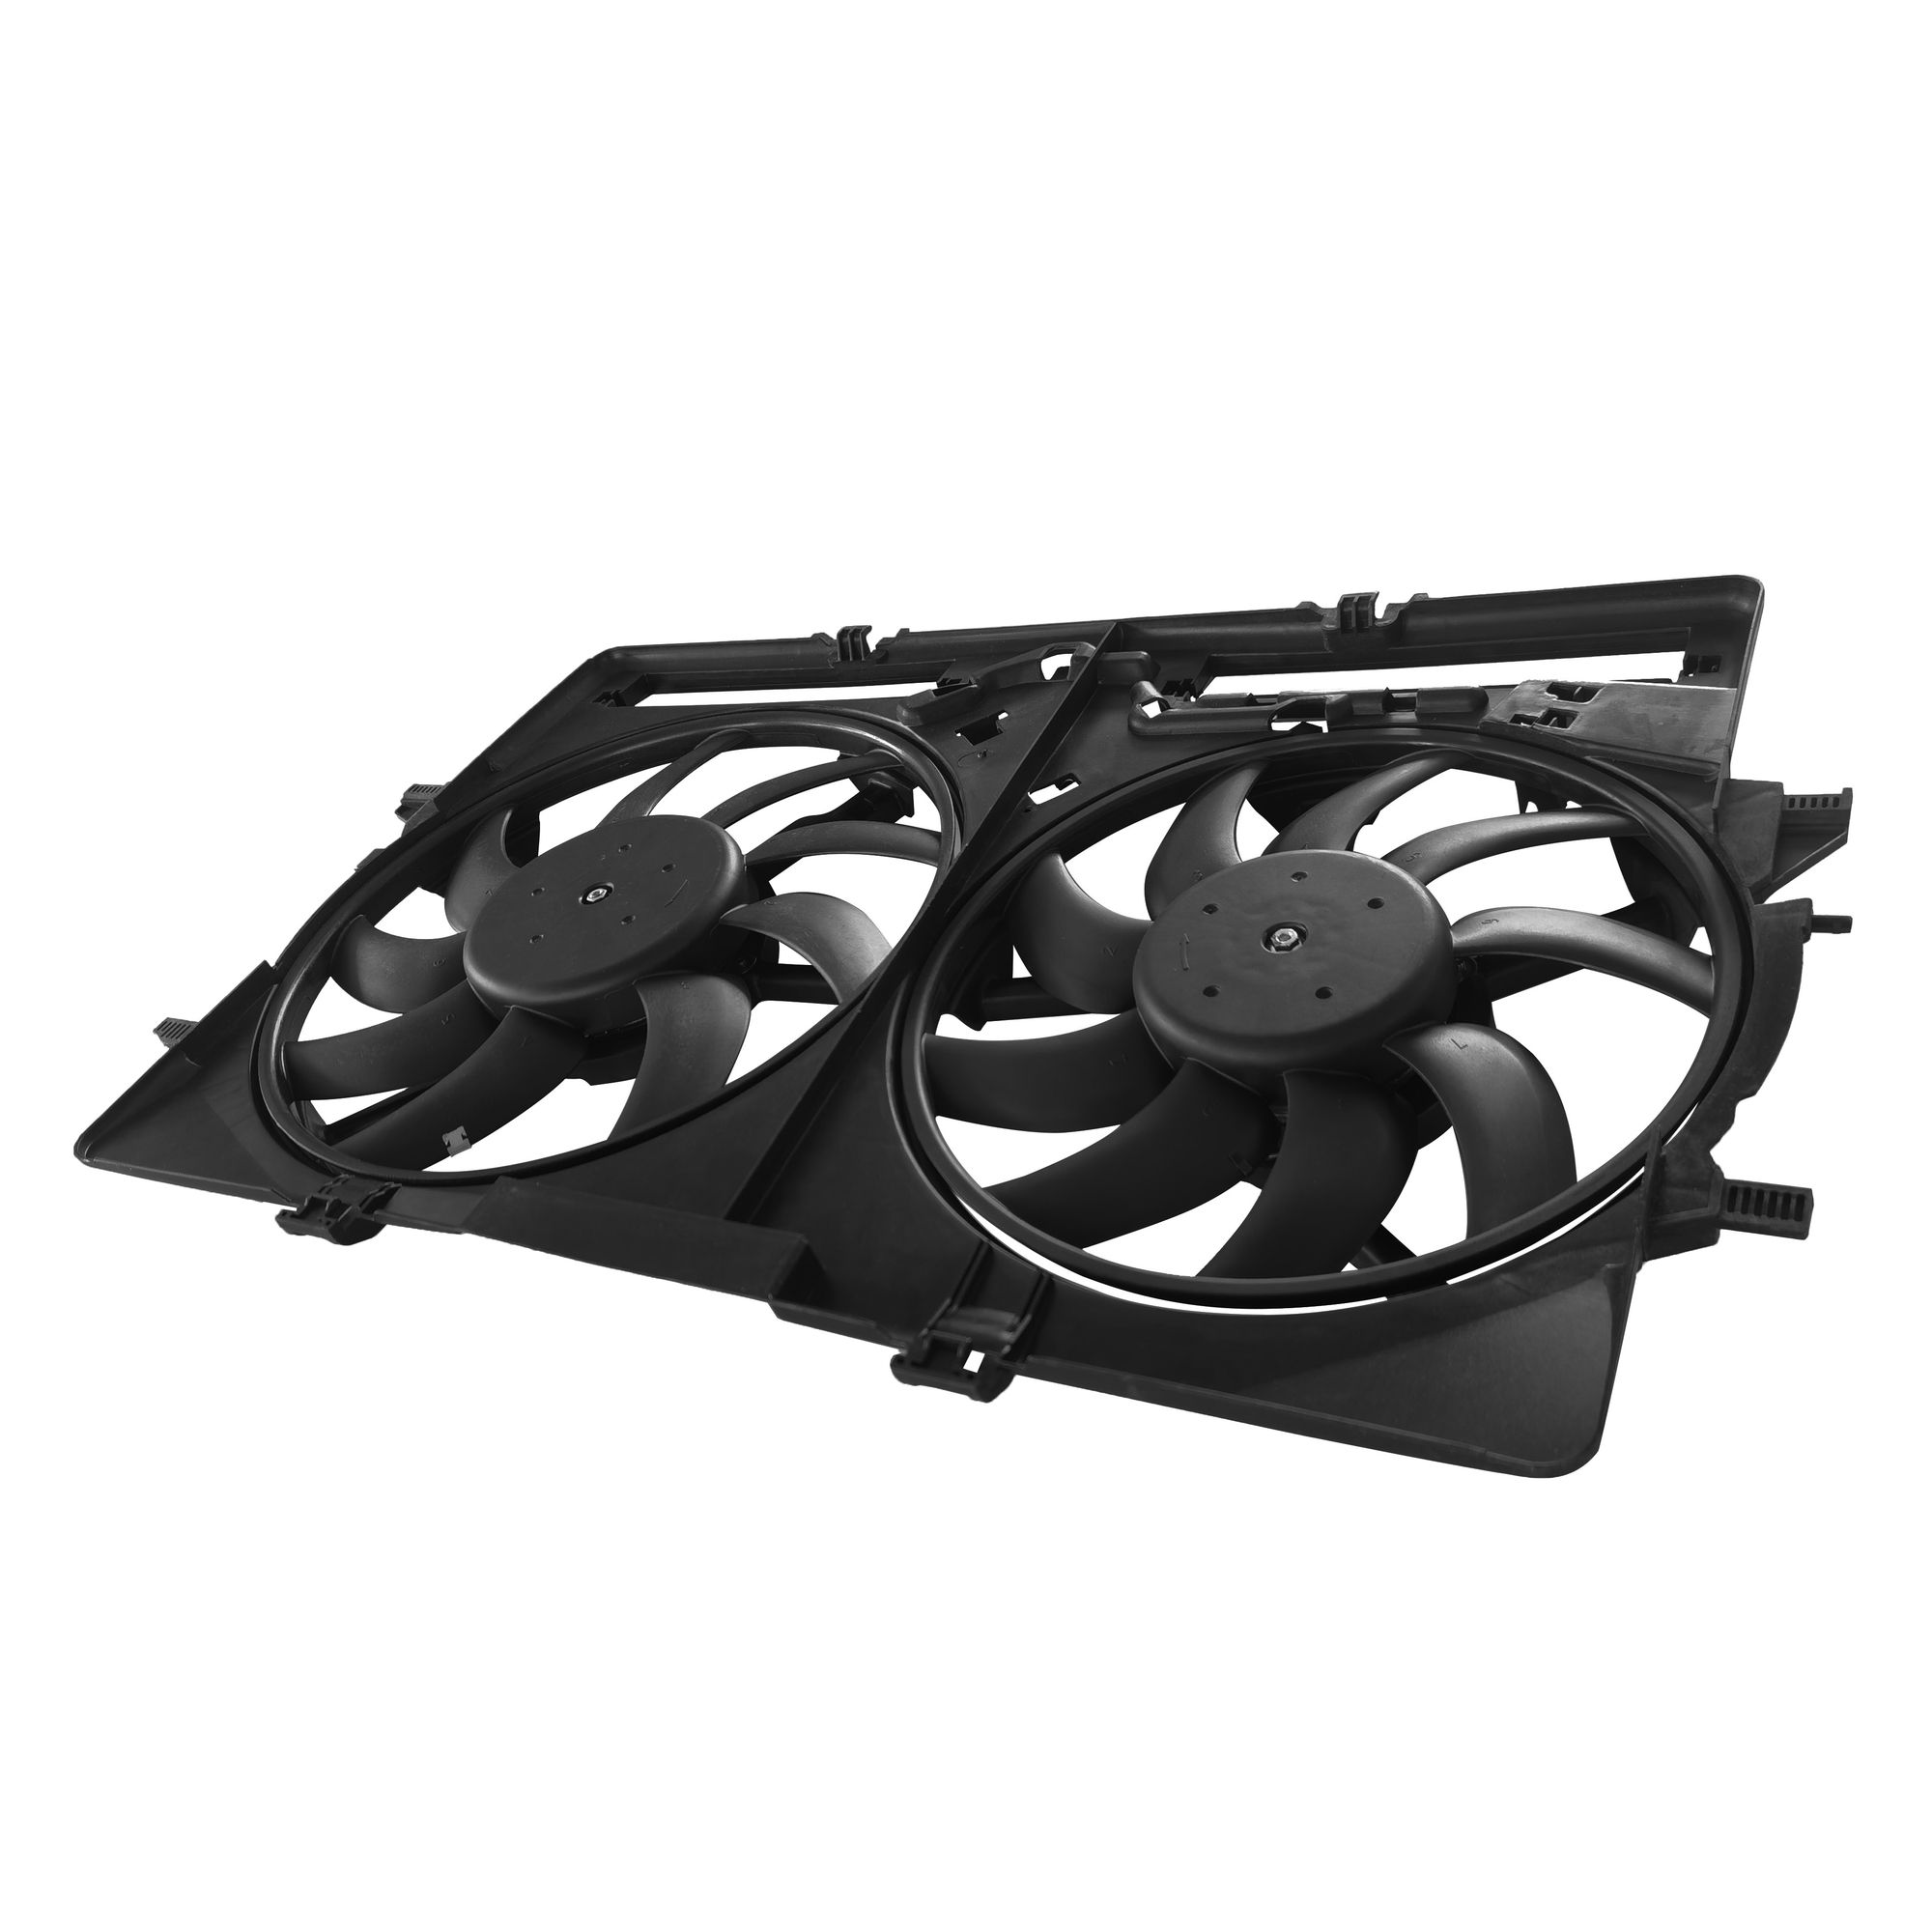 Engine Cooling Fan Assembly For Audi A4 A5 Q5 S4 S5 8K0121207A 622940 FA70926 620-839 - image 3 of 4